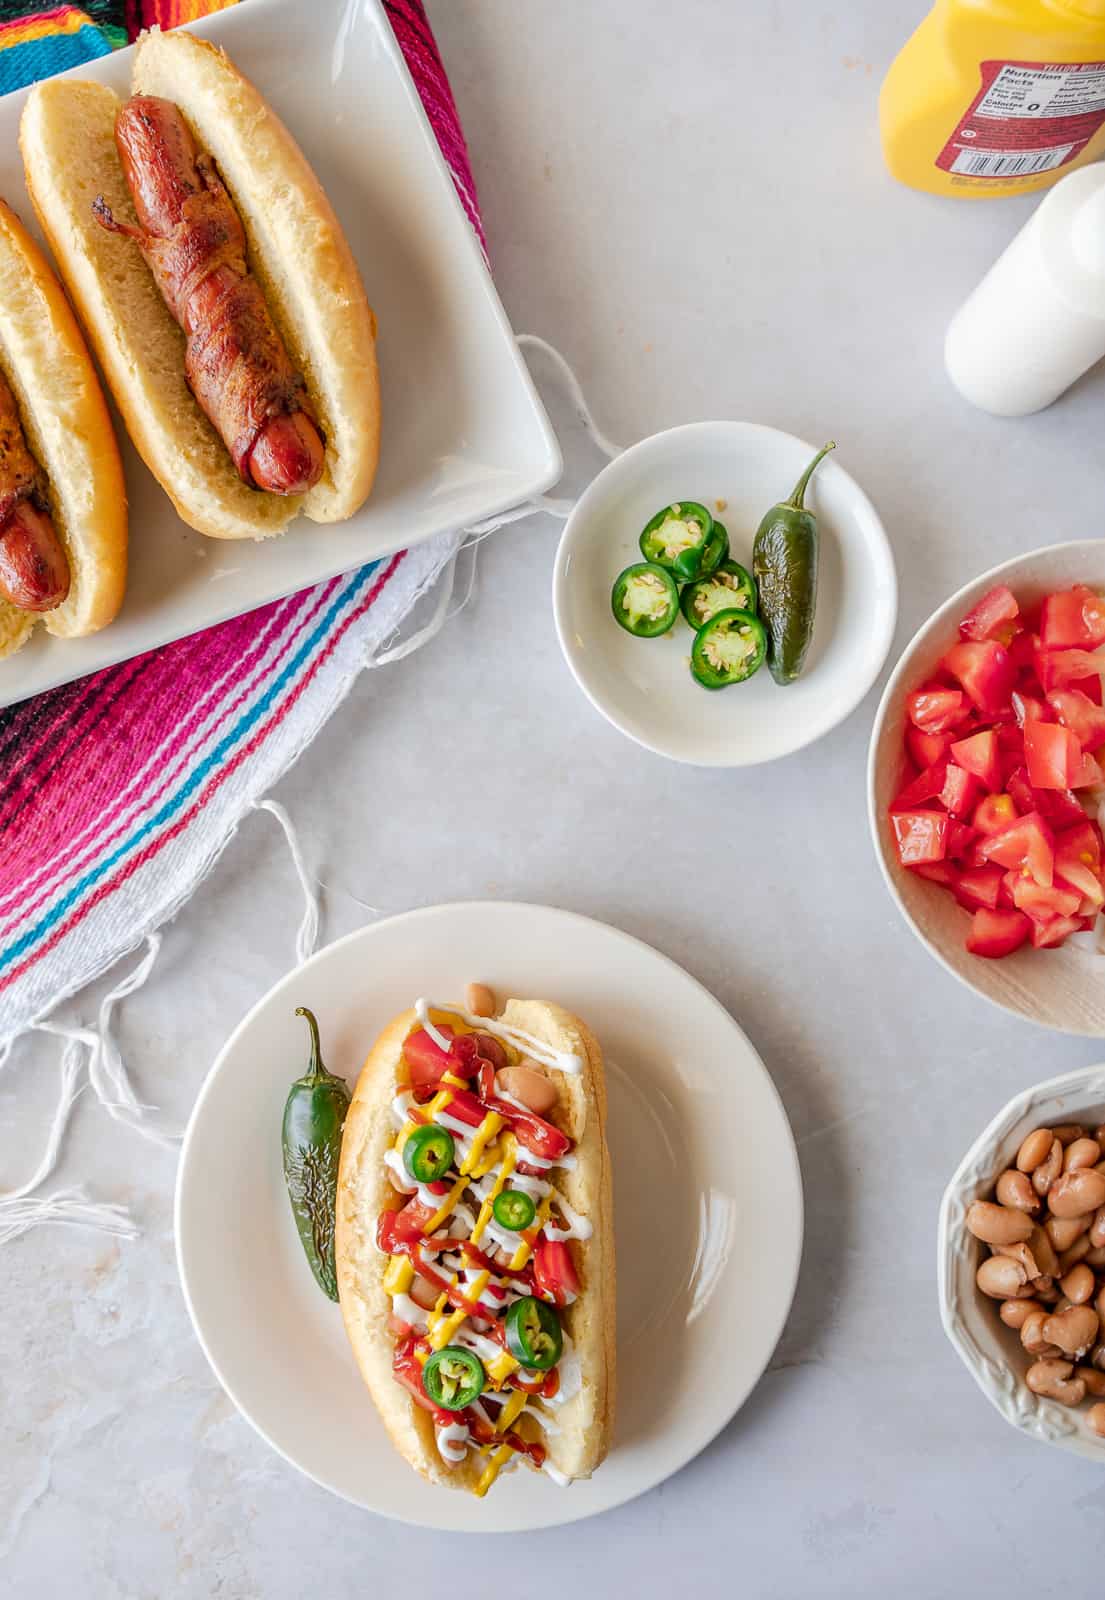 Overhead view of plain Sonoran hot dogs on a plate and one with toppings.